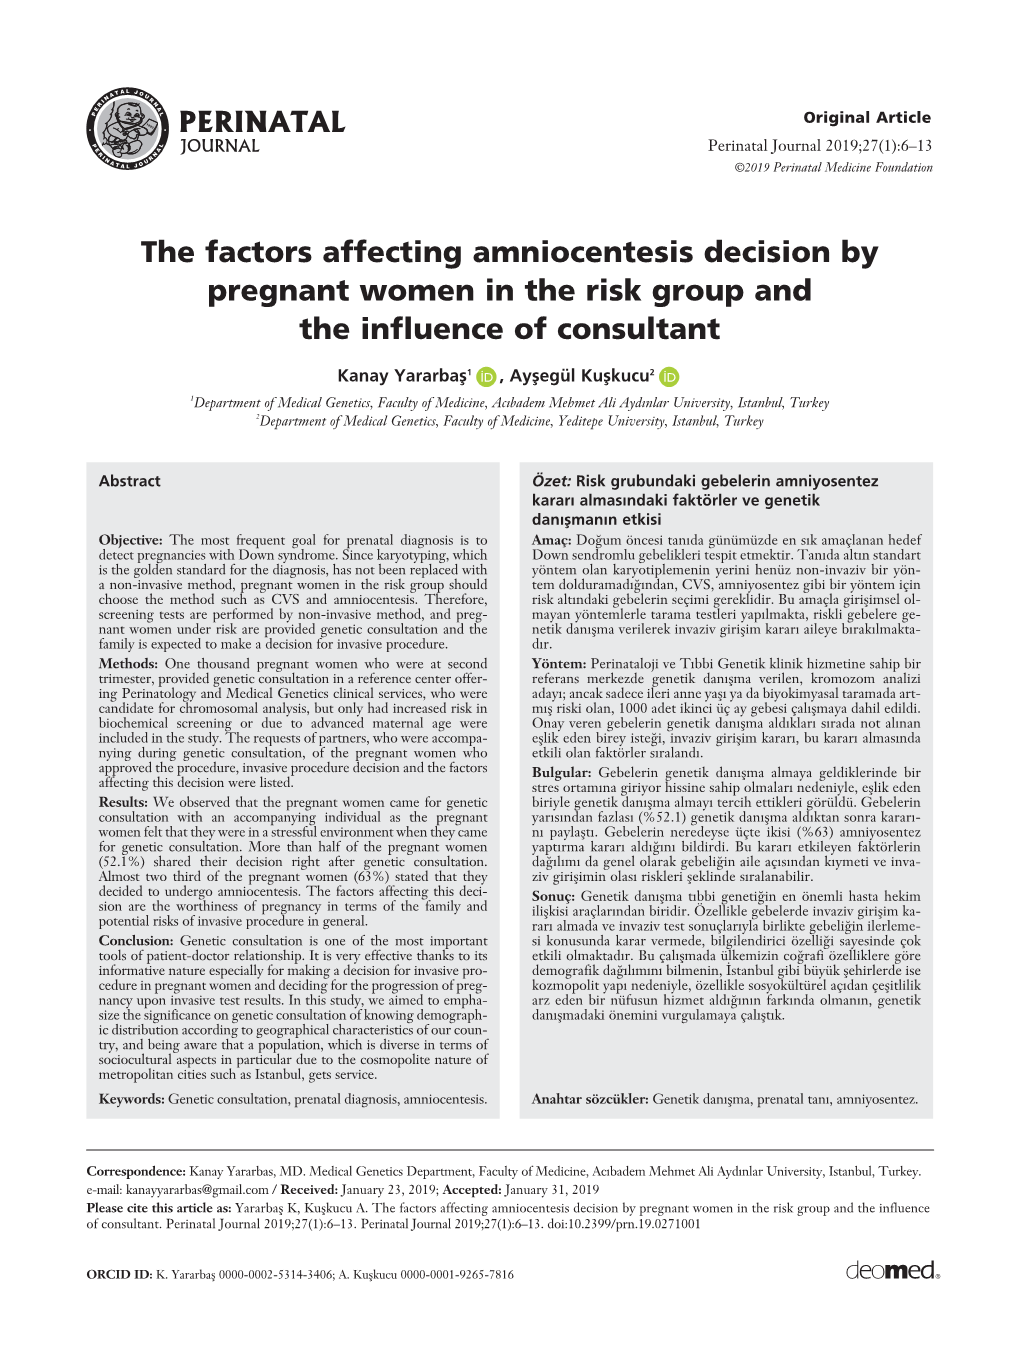 The Factors Affecting Amniocentesis Decision by Pregnant Women in the Risk Group and the Influence of Consultant